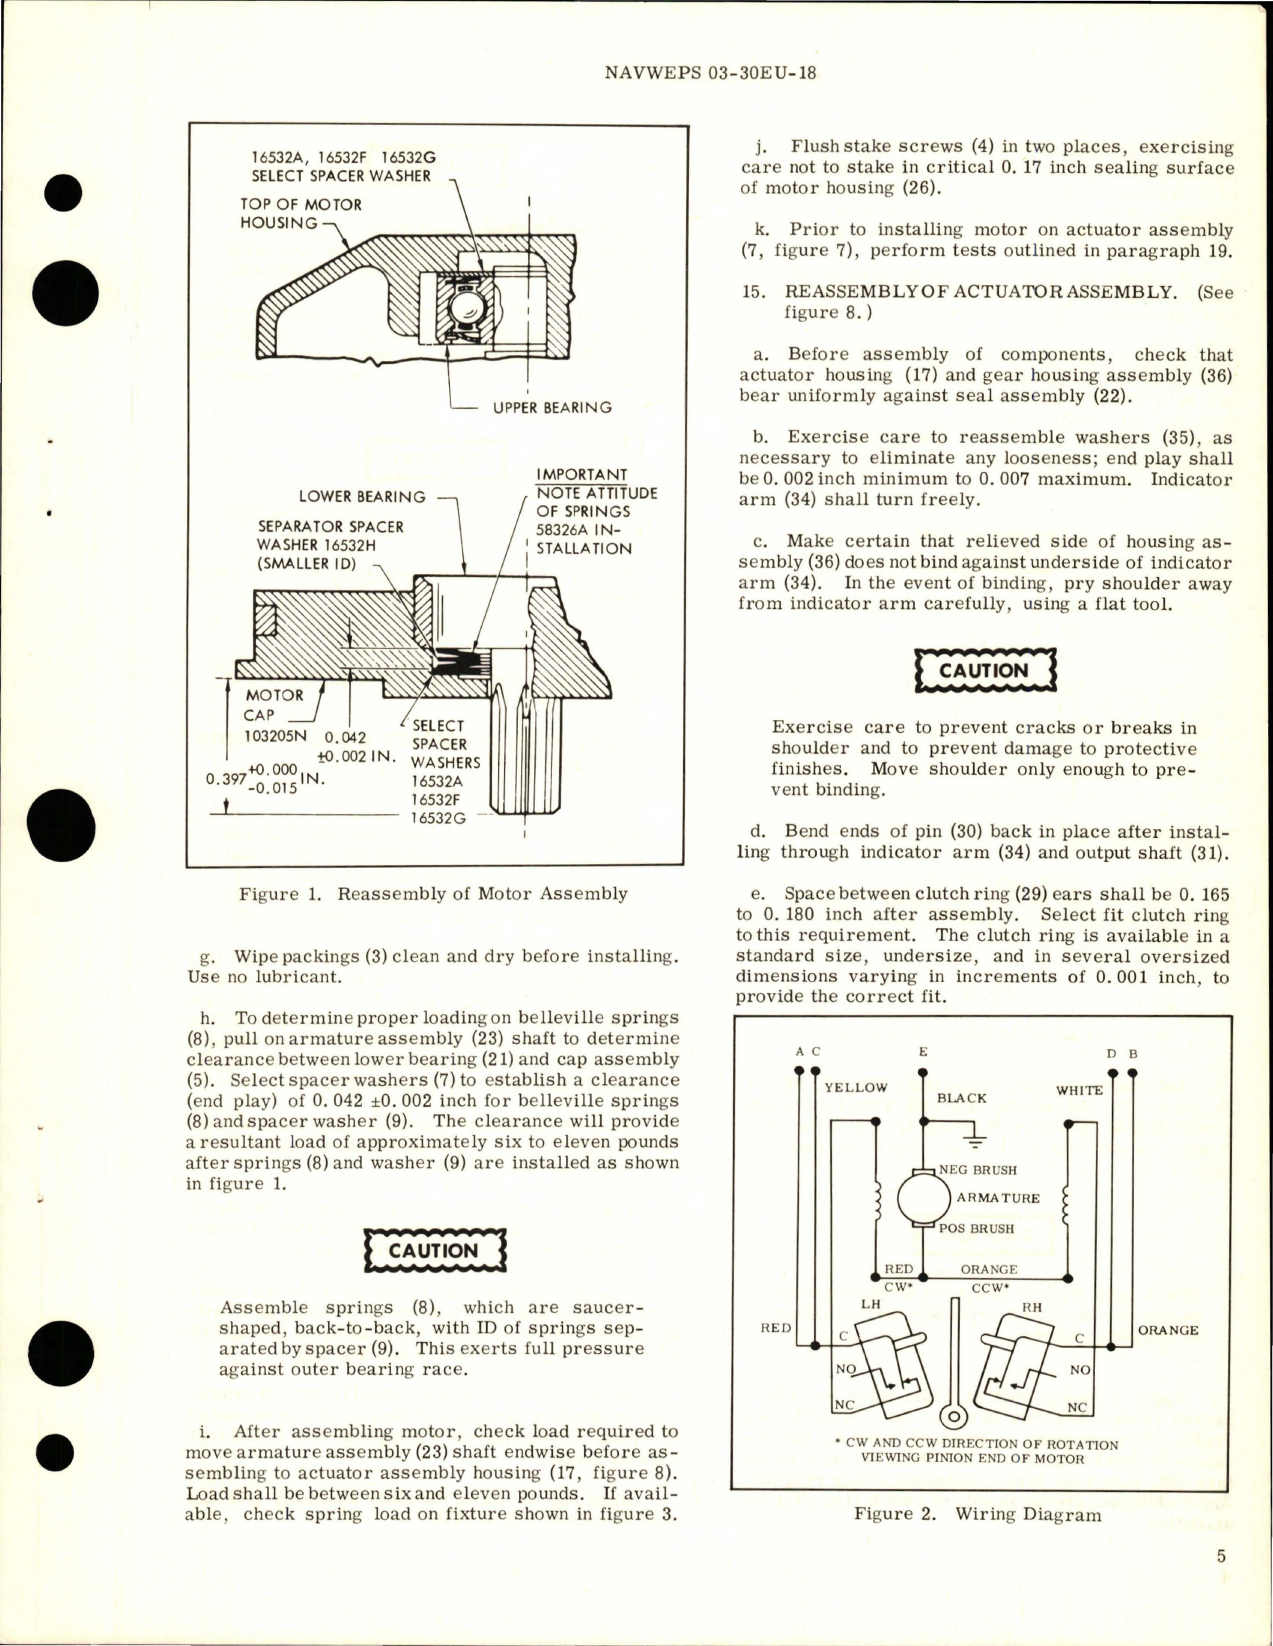 Sample page 7 from AirCorps Library document: Overhaul Instructions with Parts Breakdown for Motor Operated Gate Valve - Part AV16B1638B